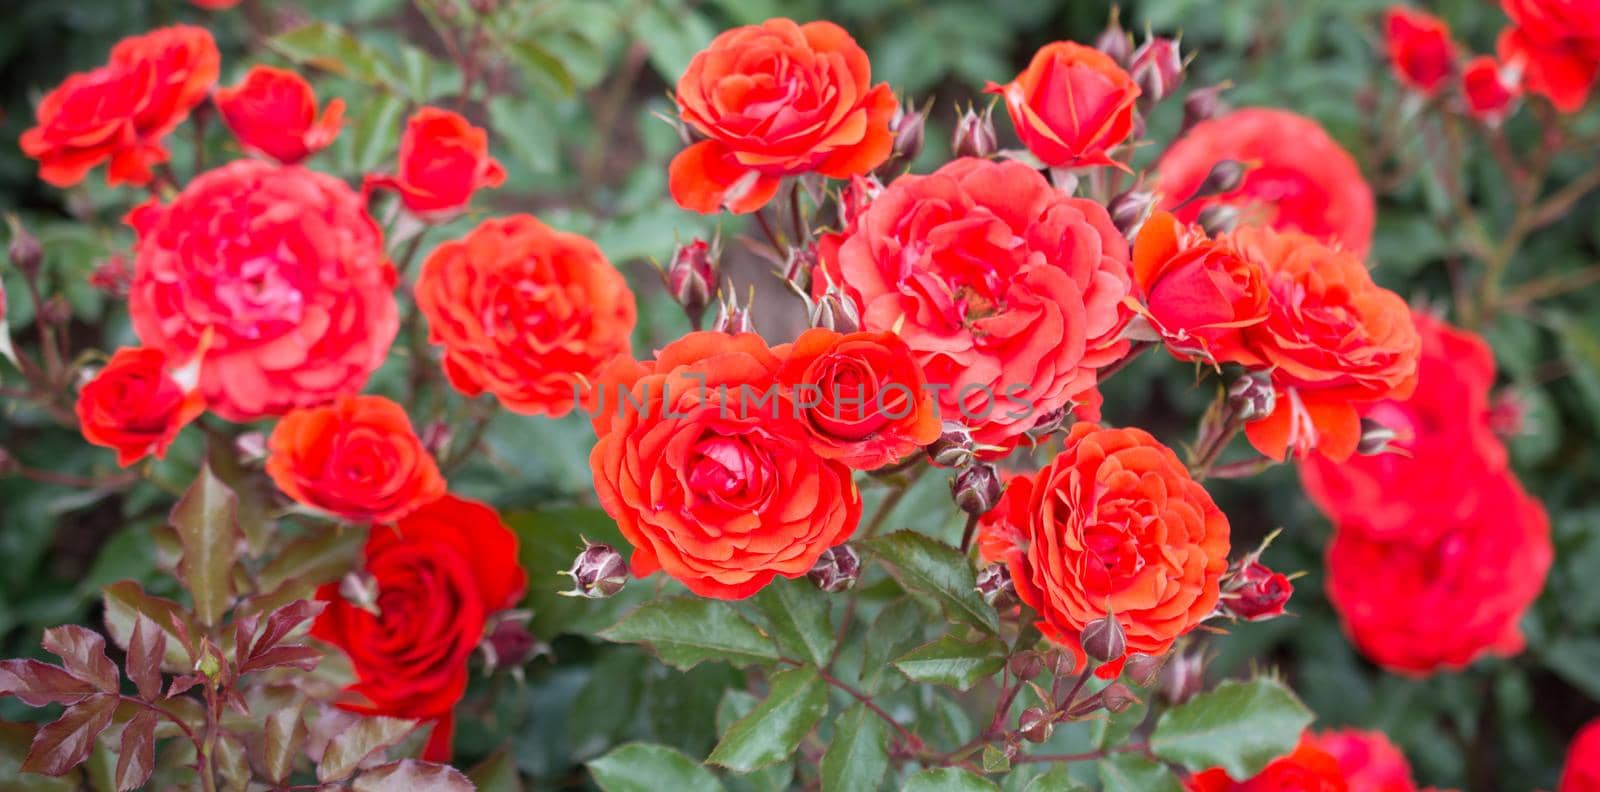 Blooming beautiful colorful roses in the garden by berkay